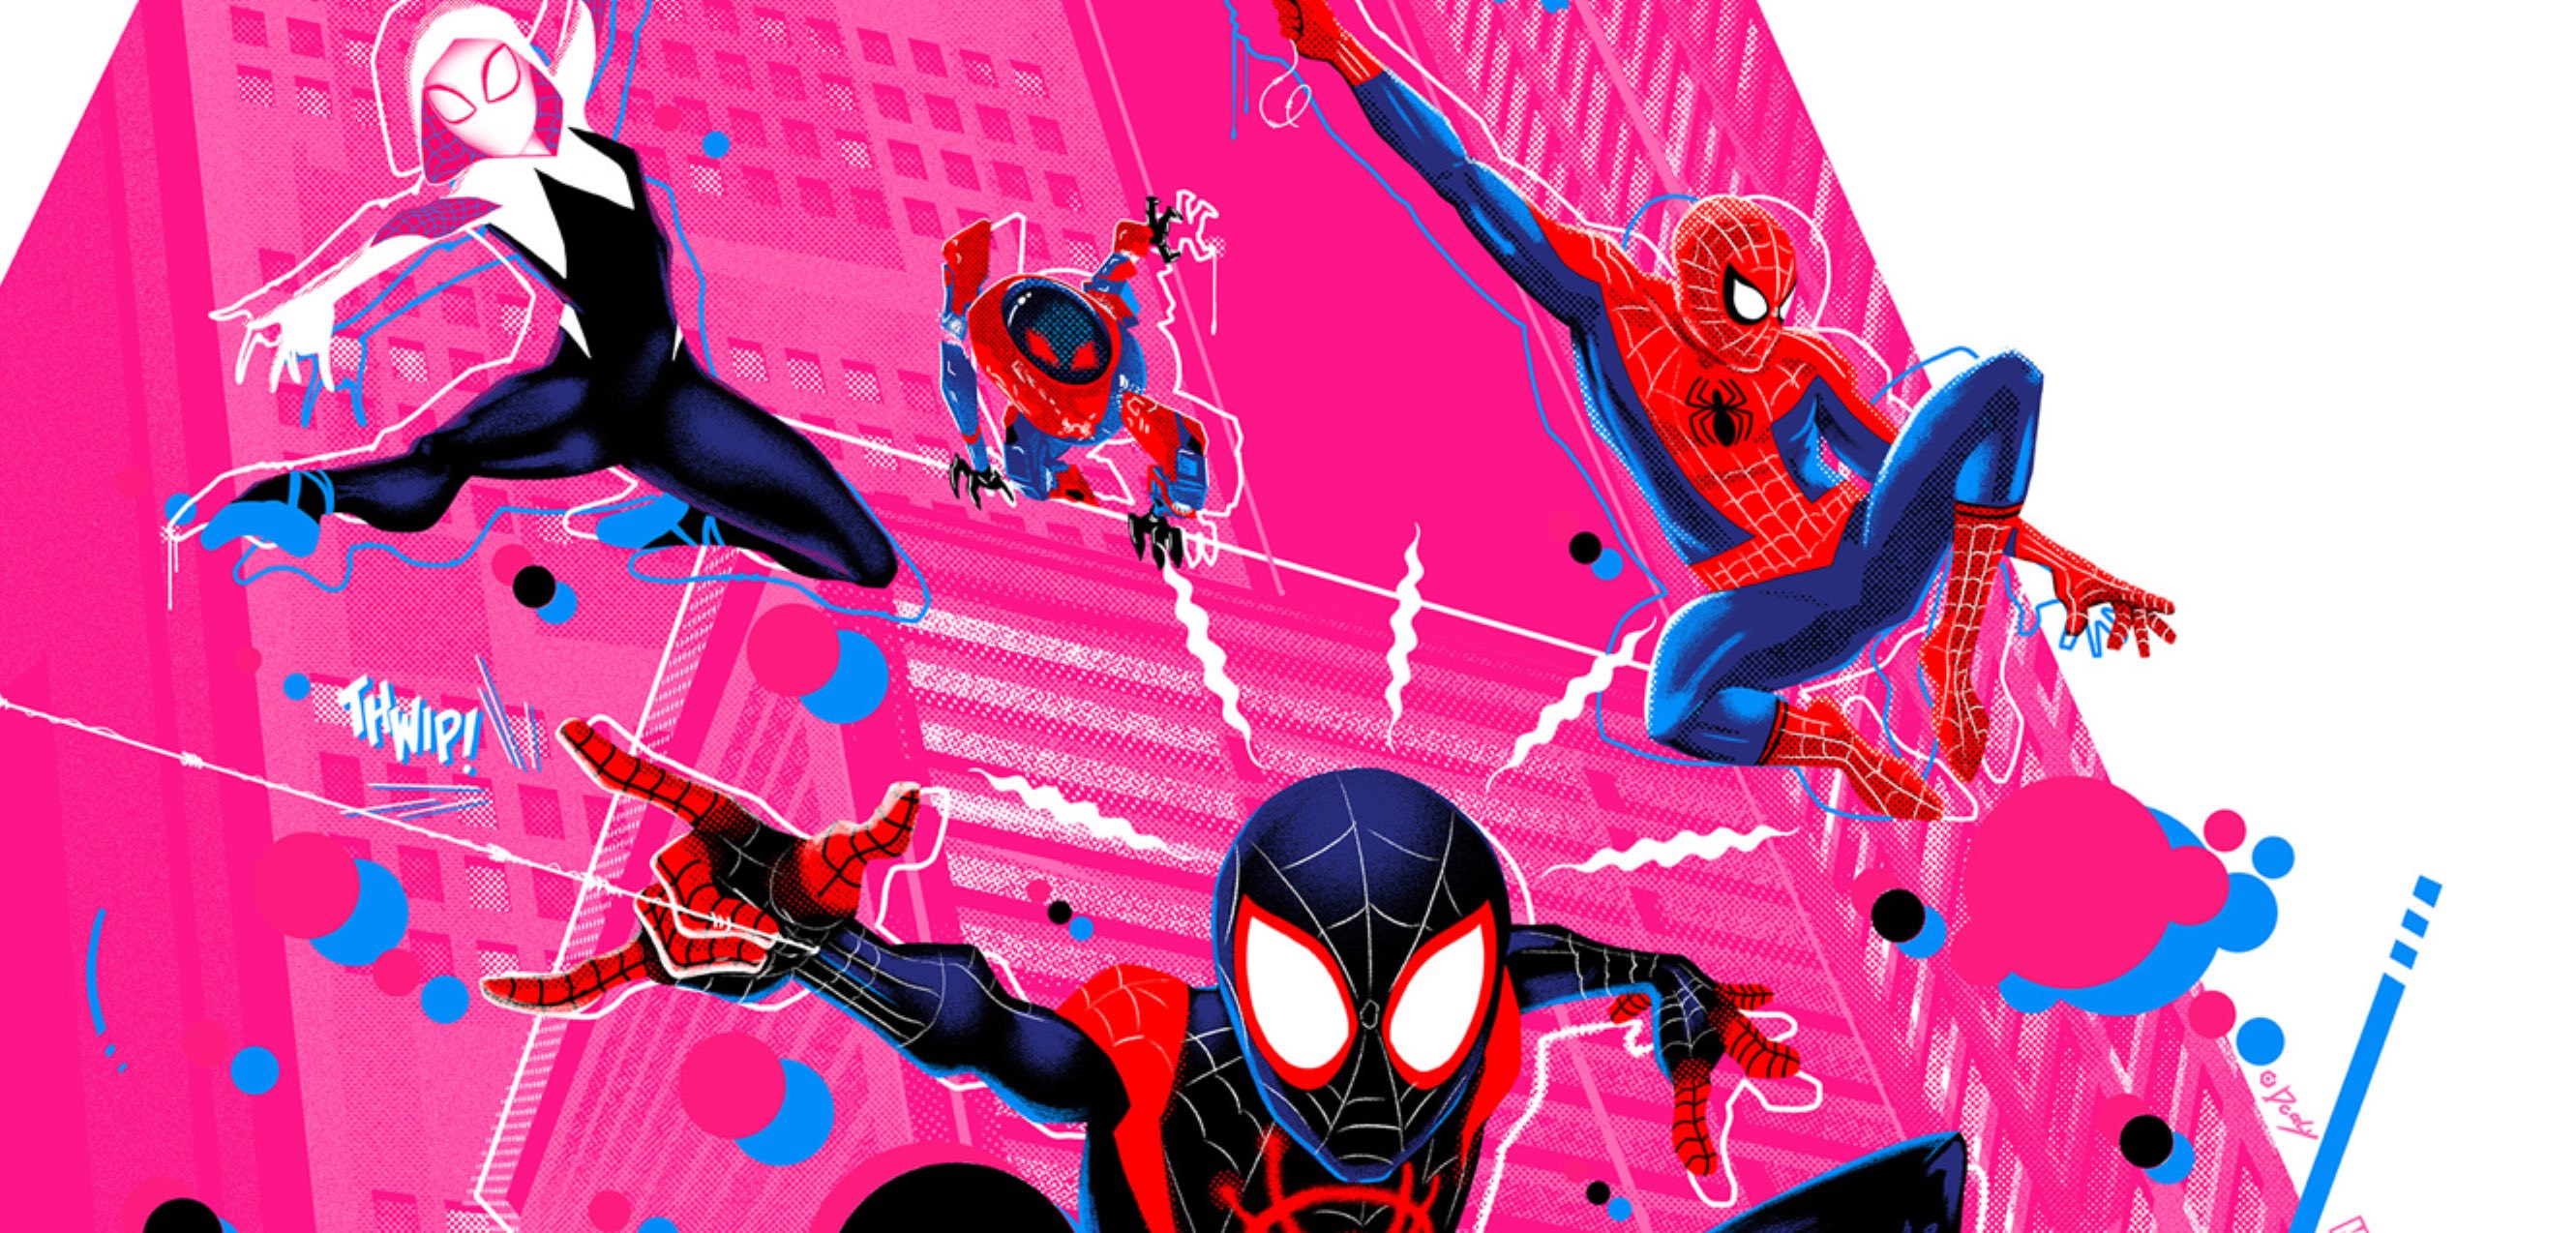 Cool Stuff: Incredible ‘Spider-Man: Into The Spider-Verse’ Art Show At